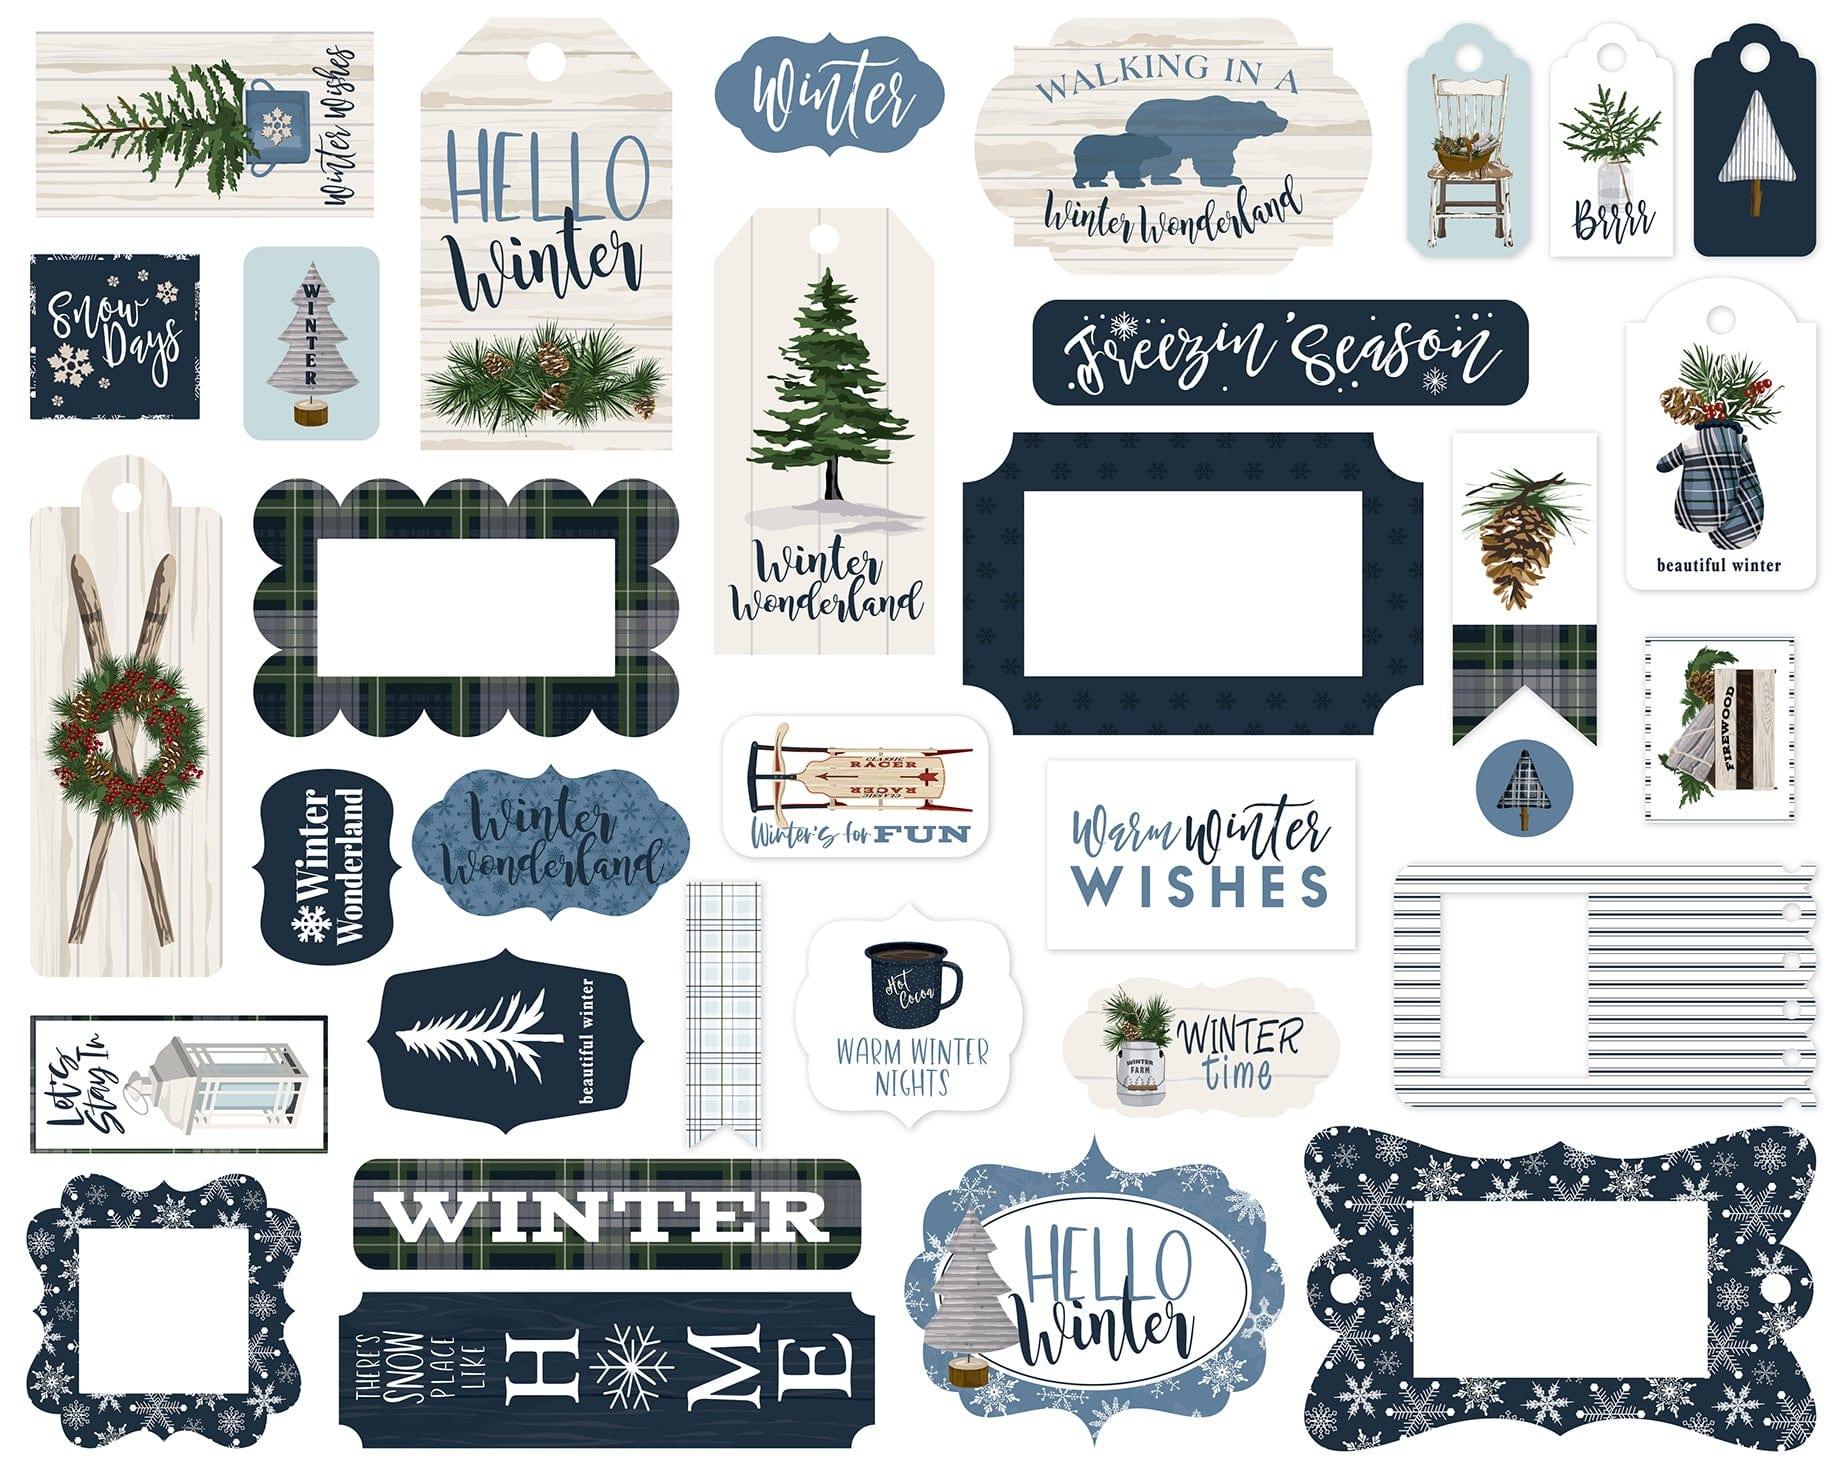 Welcome Winter Collection 5 x 5 Scrapbook Tags & Frames Die Cuts by Carta Bella - Scrapbook Supply Companies